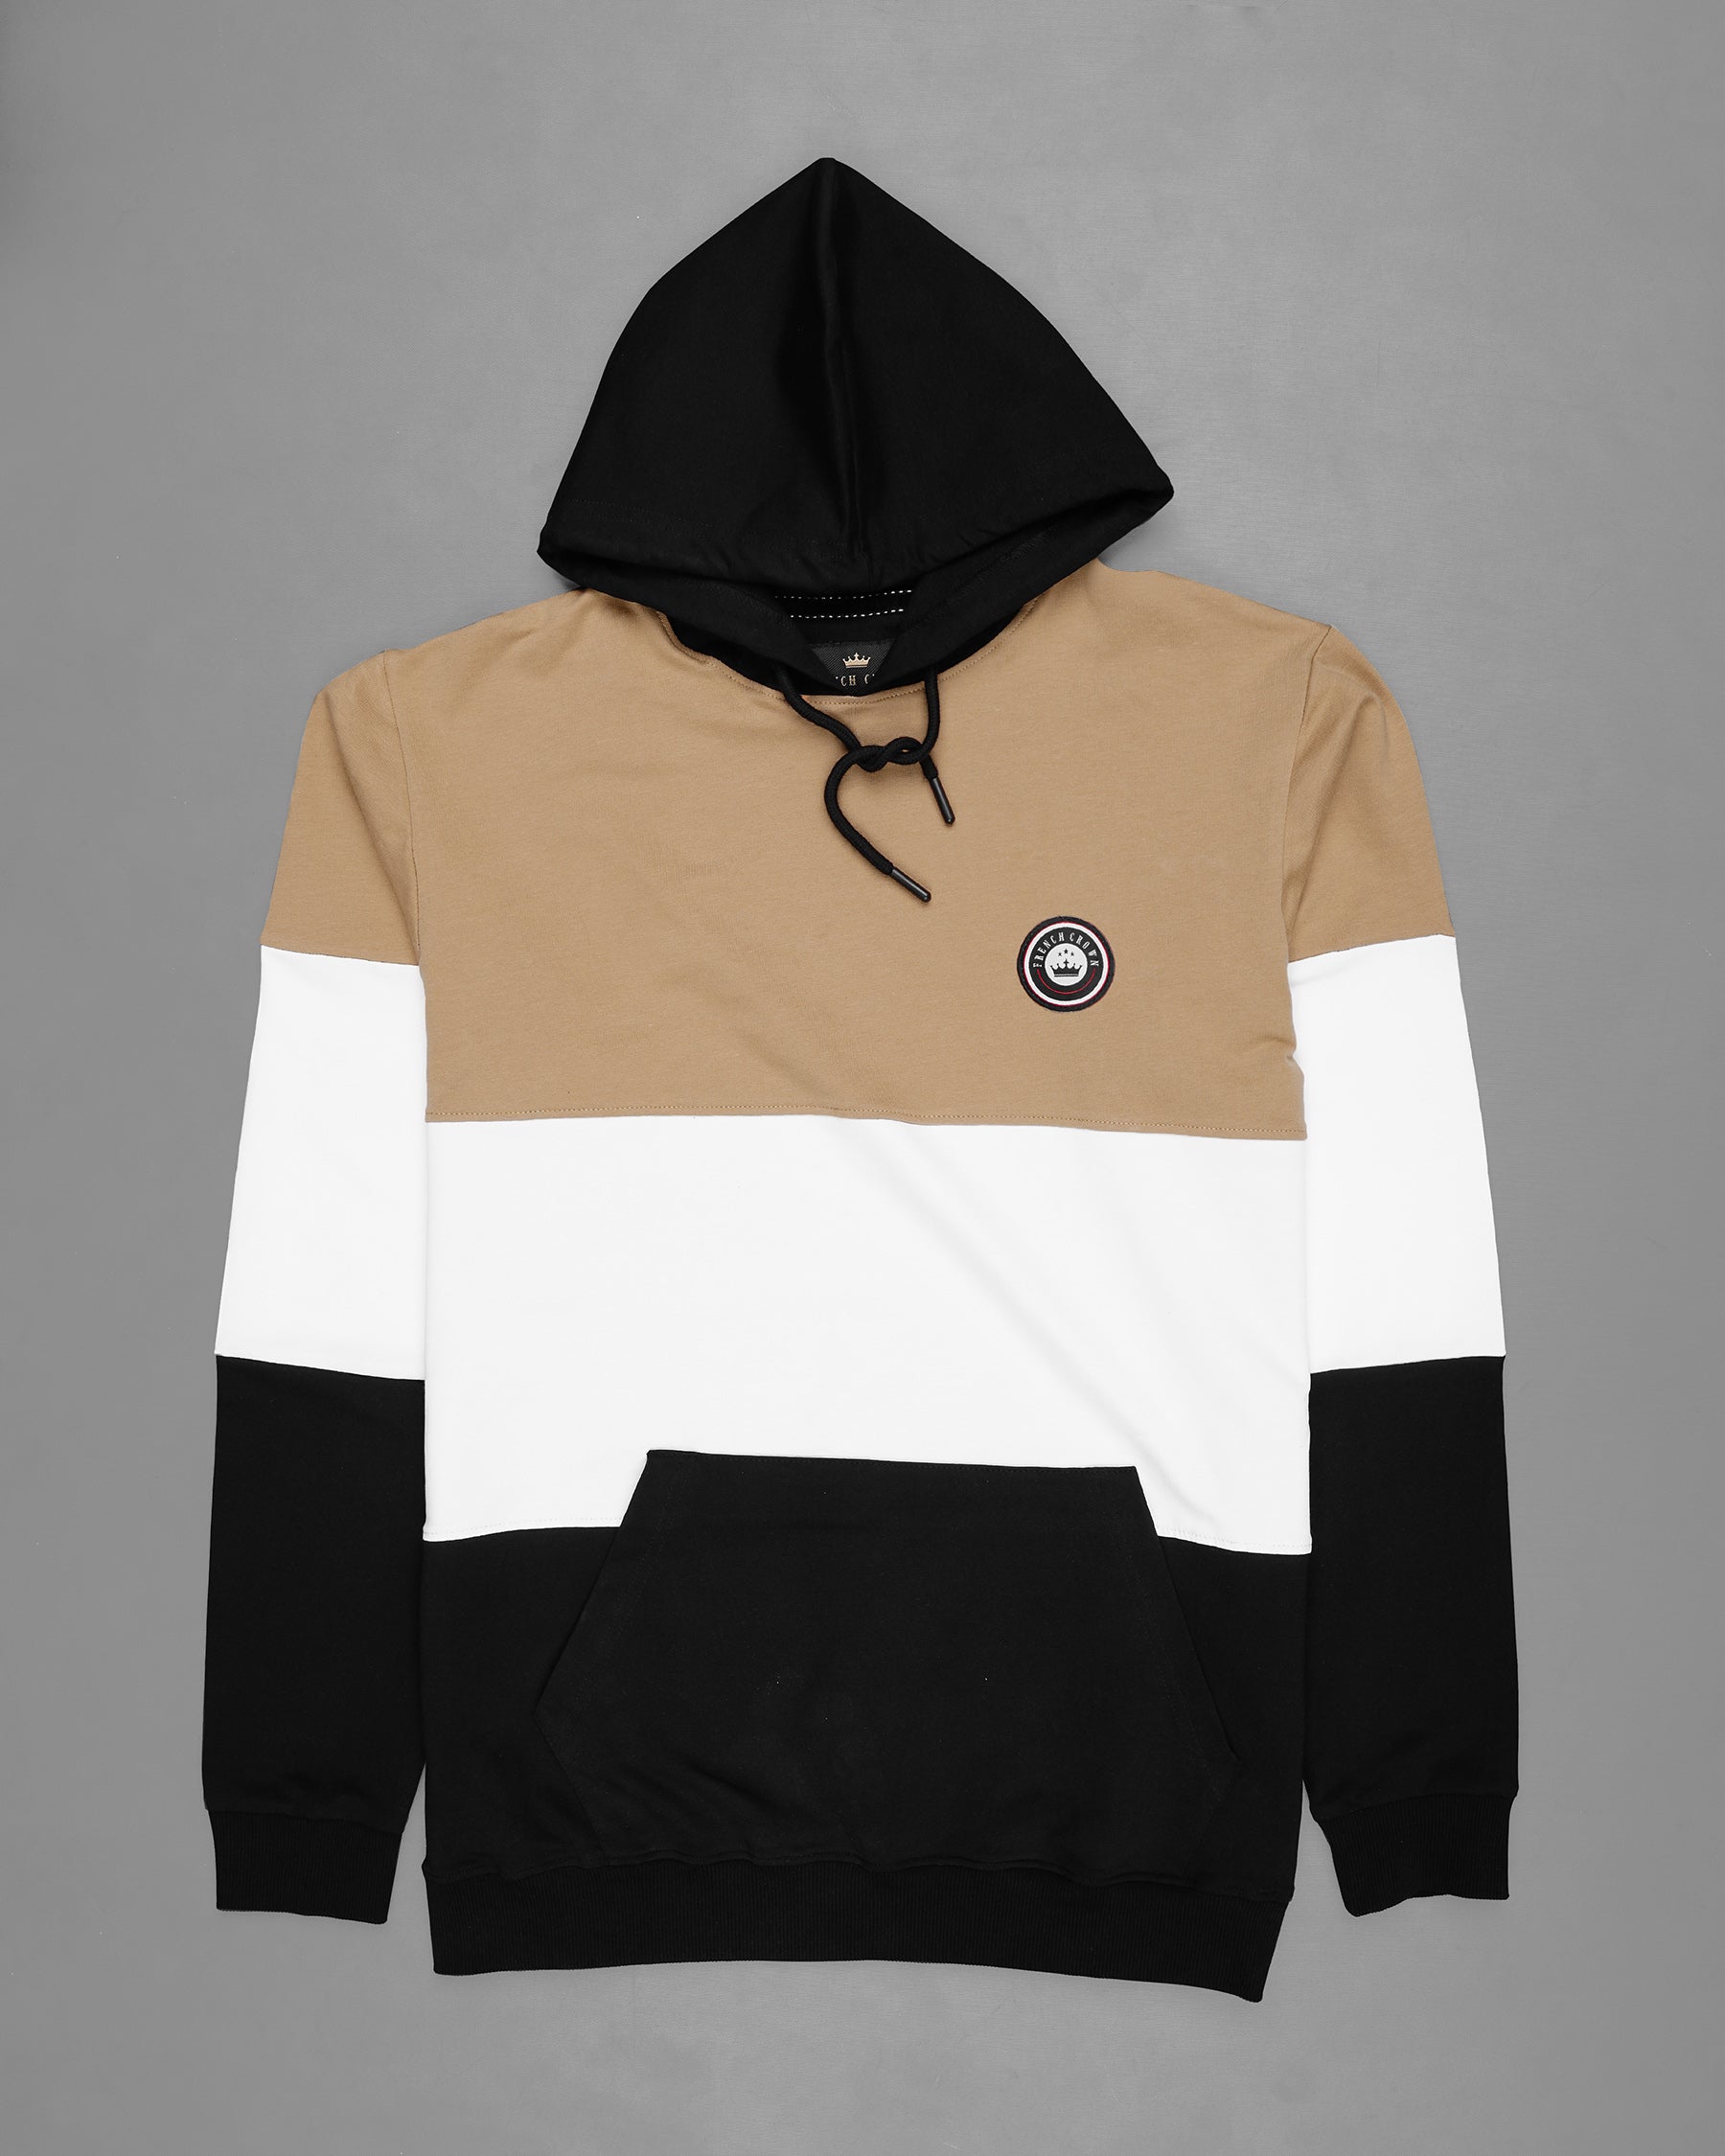 Cashmere Light Brown and Bright White With Black Full Sleeves Super Soft Premium  Hoodie Shirt Neck Sweatshirt For Men.